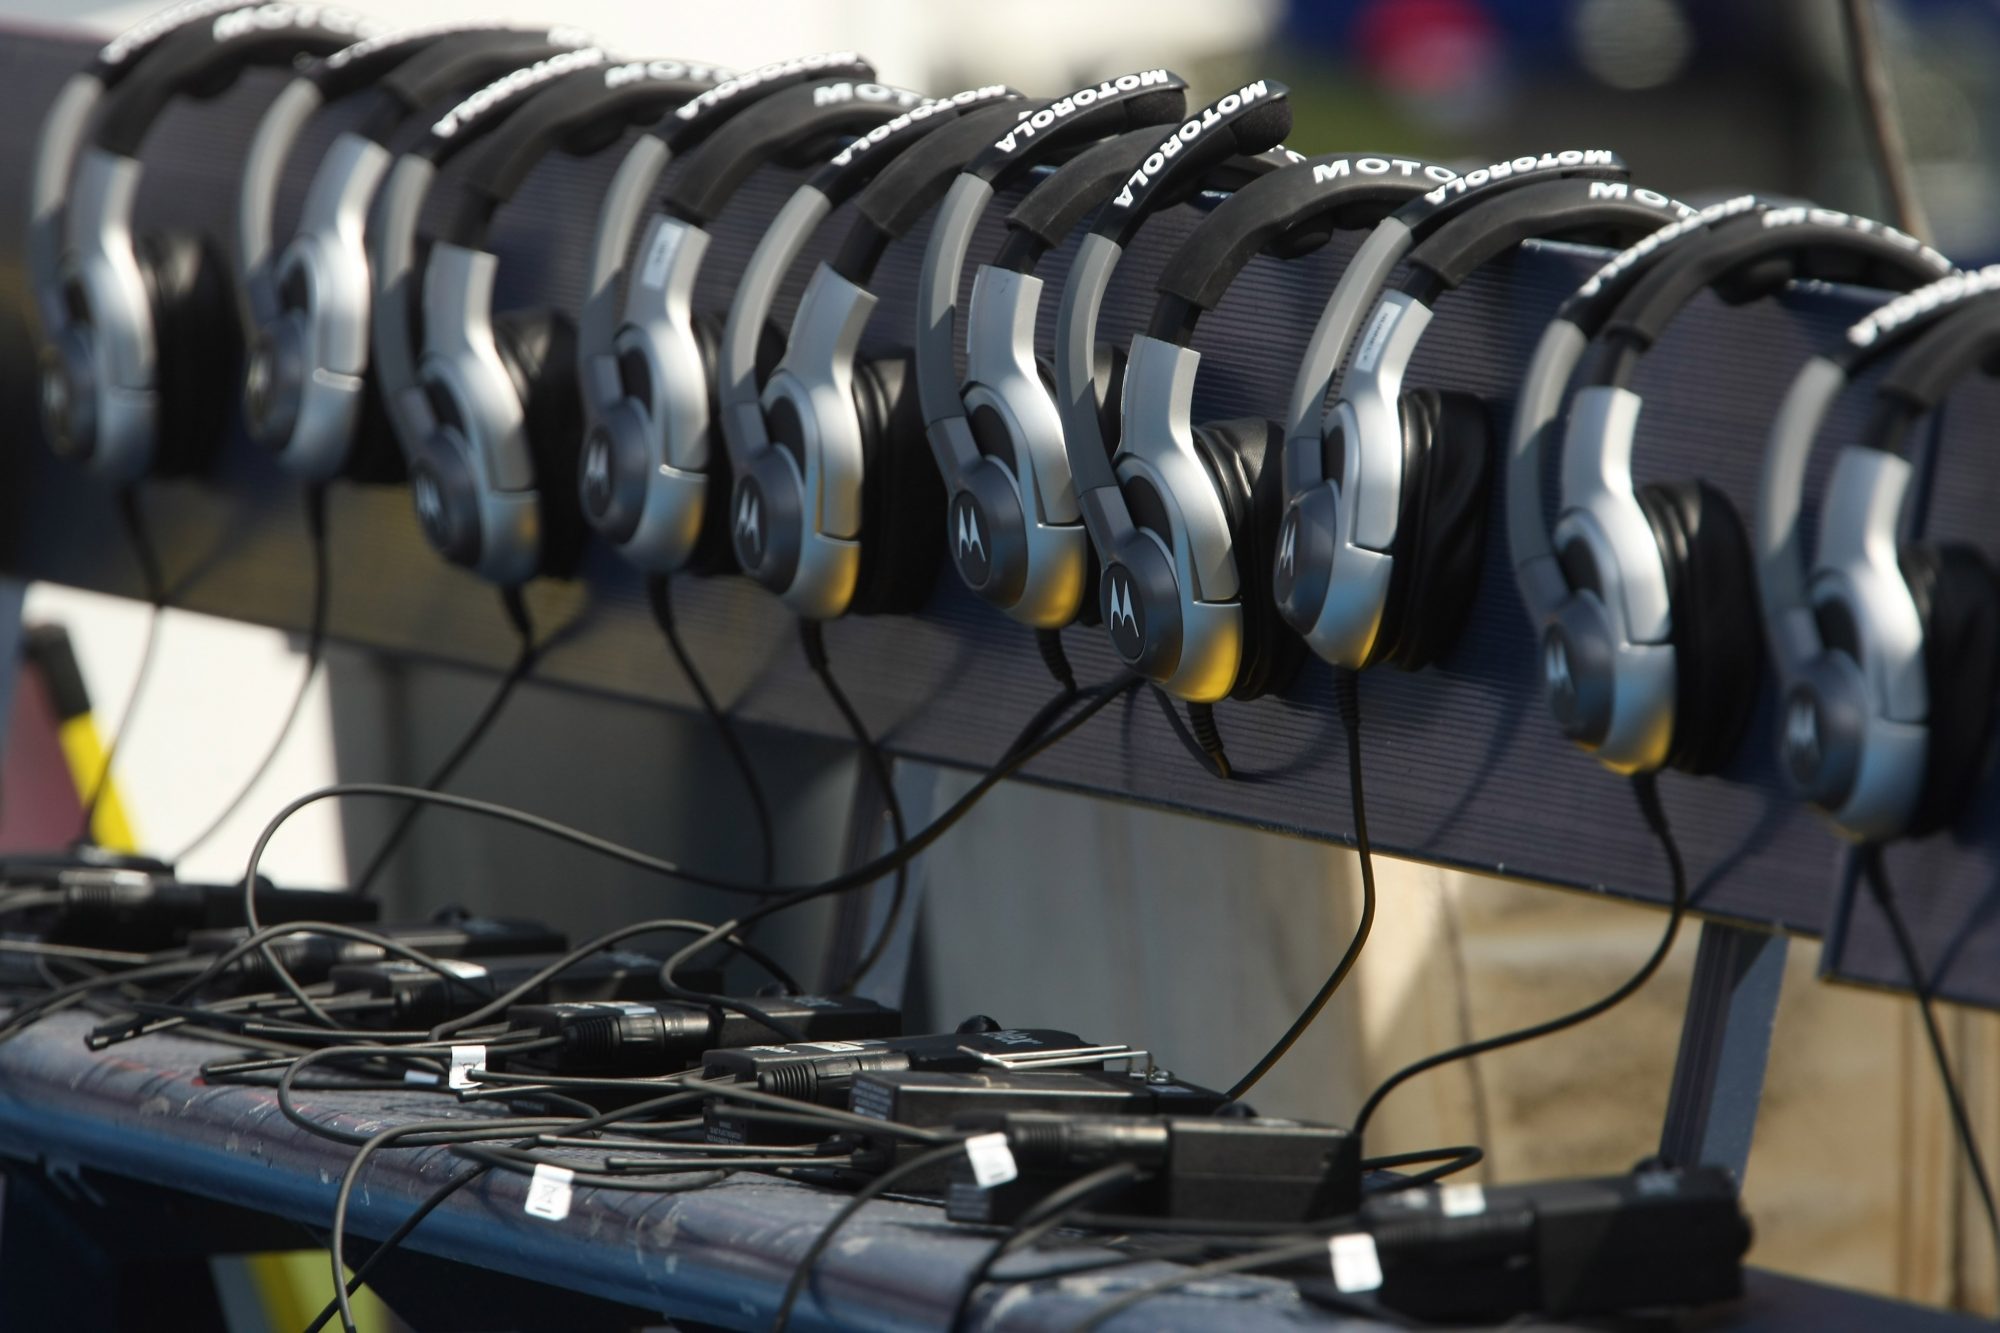 Coaches' headsets just waiting to be worn, by bloggers.